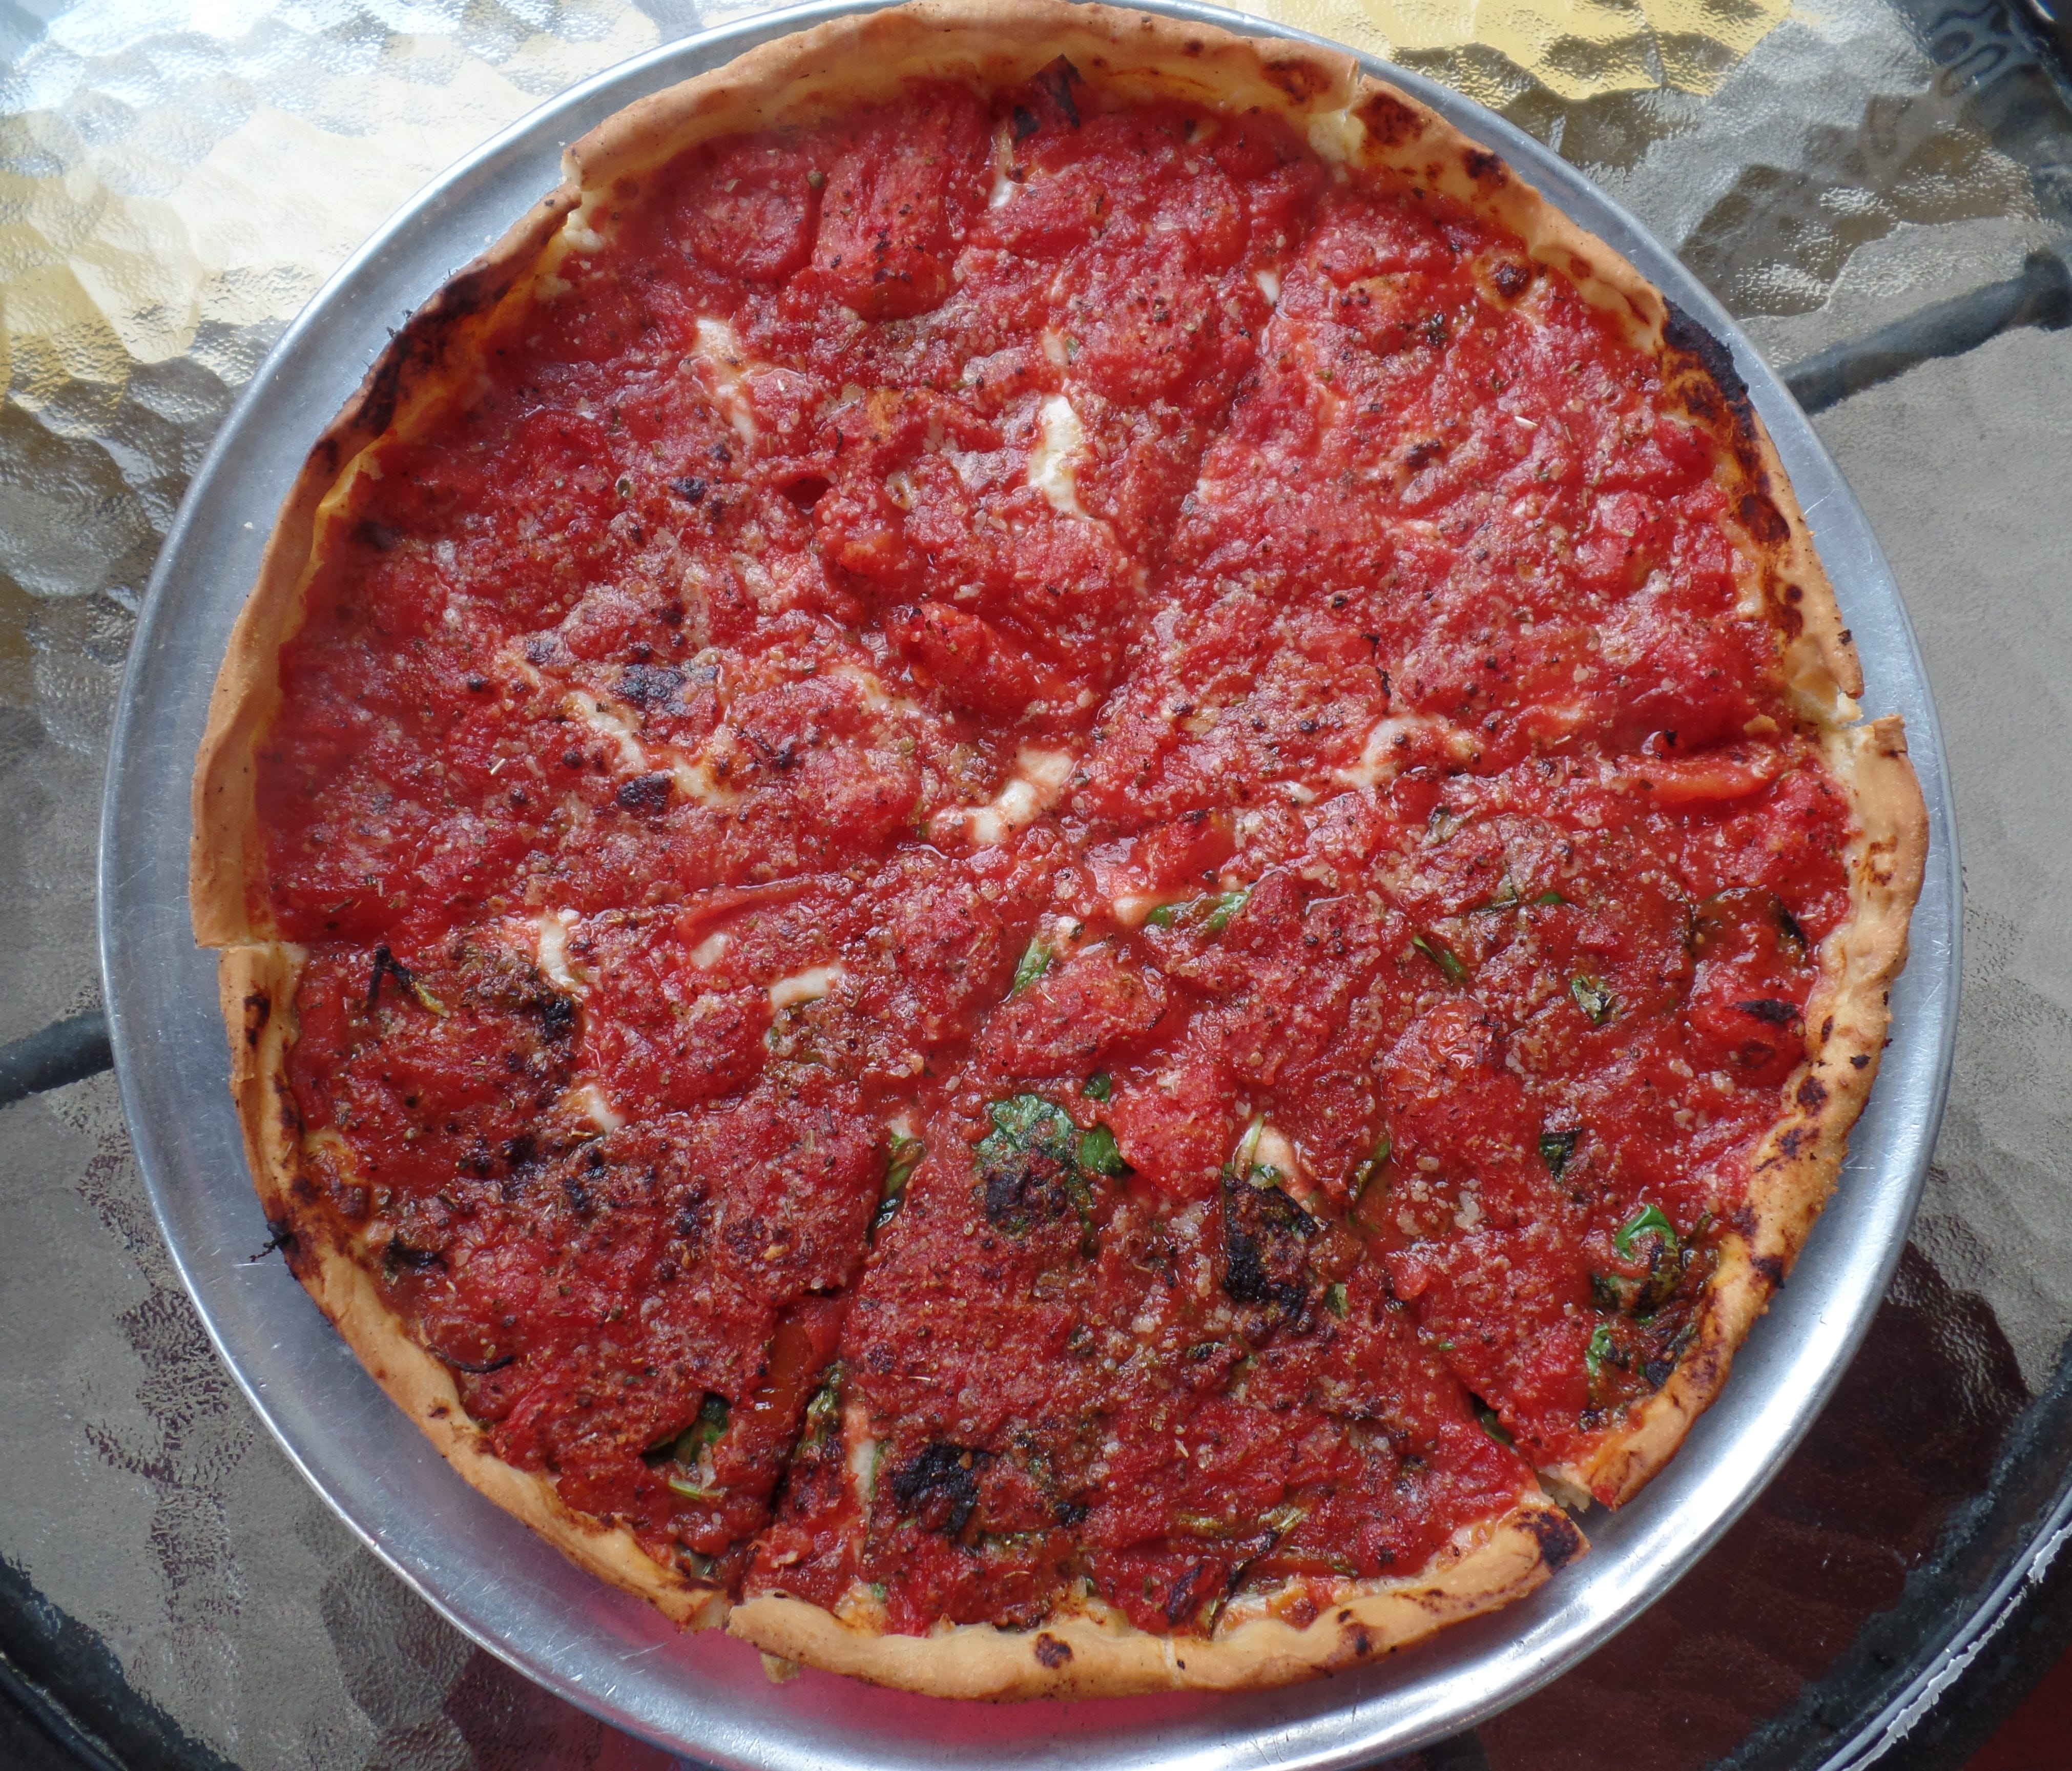 Chicago's My Pi Pizza represents Illinois with its famous deep dish pie.